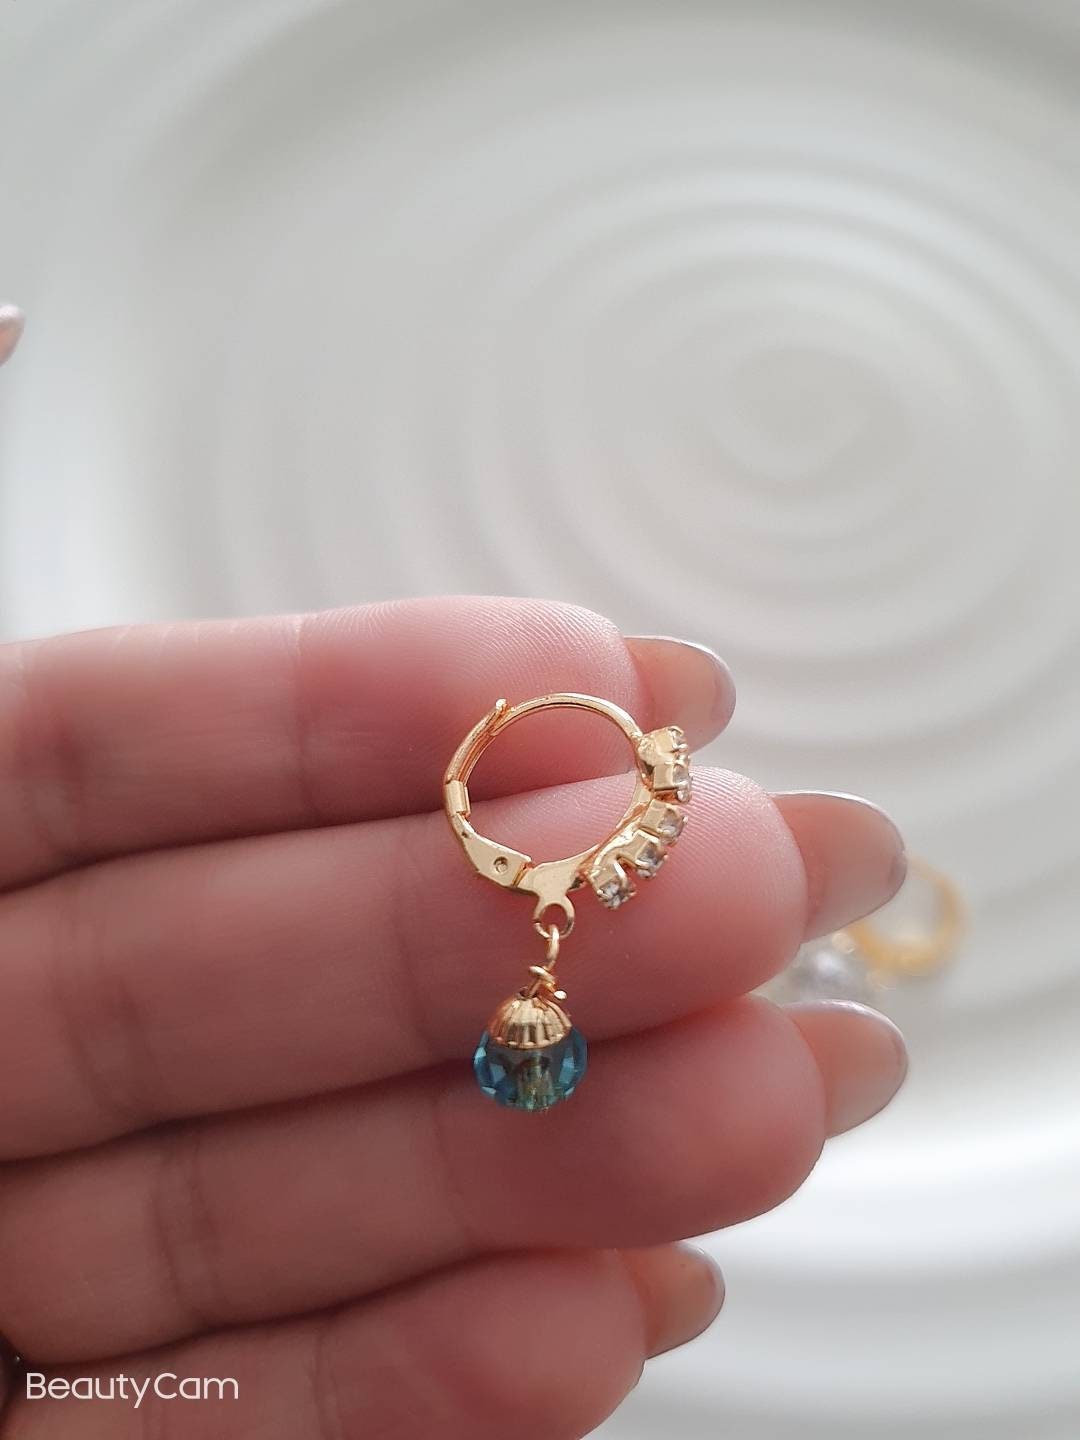 Blue Beads Nose Ring, Gold Filled Nose Hoop, Daith Earring, Tragus Hoop, Cartilage Ring, Cute Nose Ring, Unique Nose Hoop